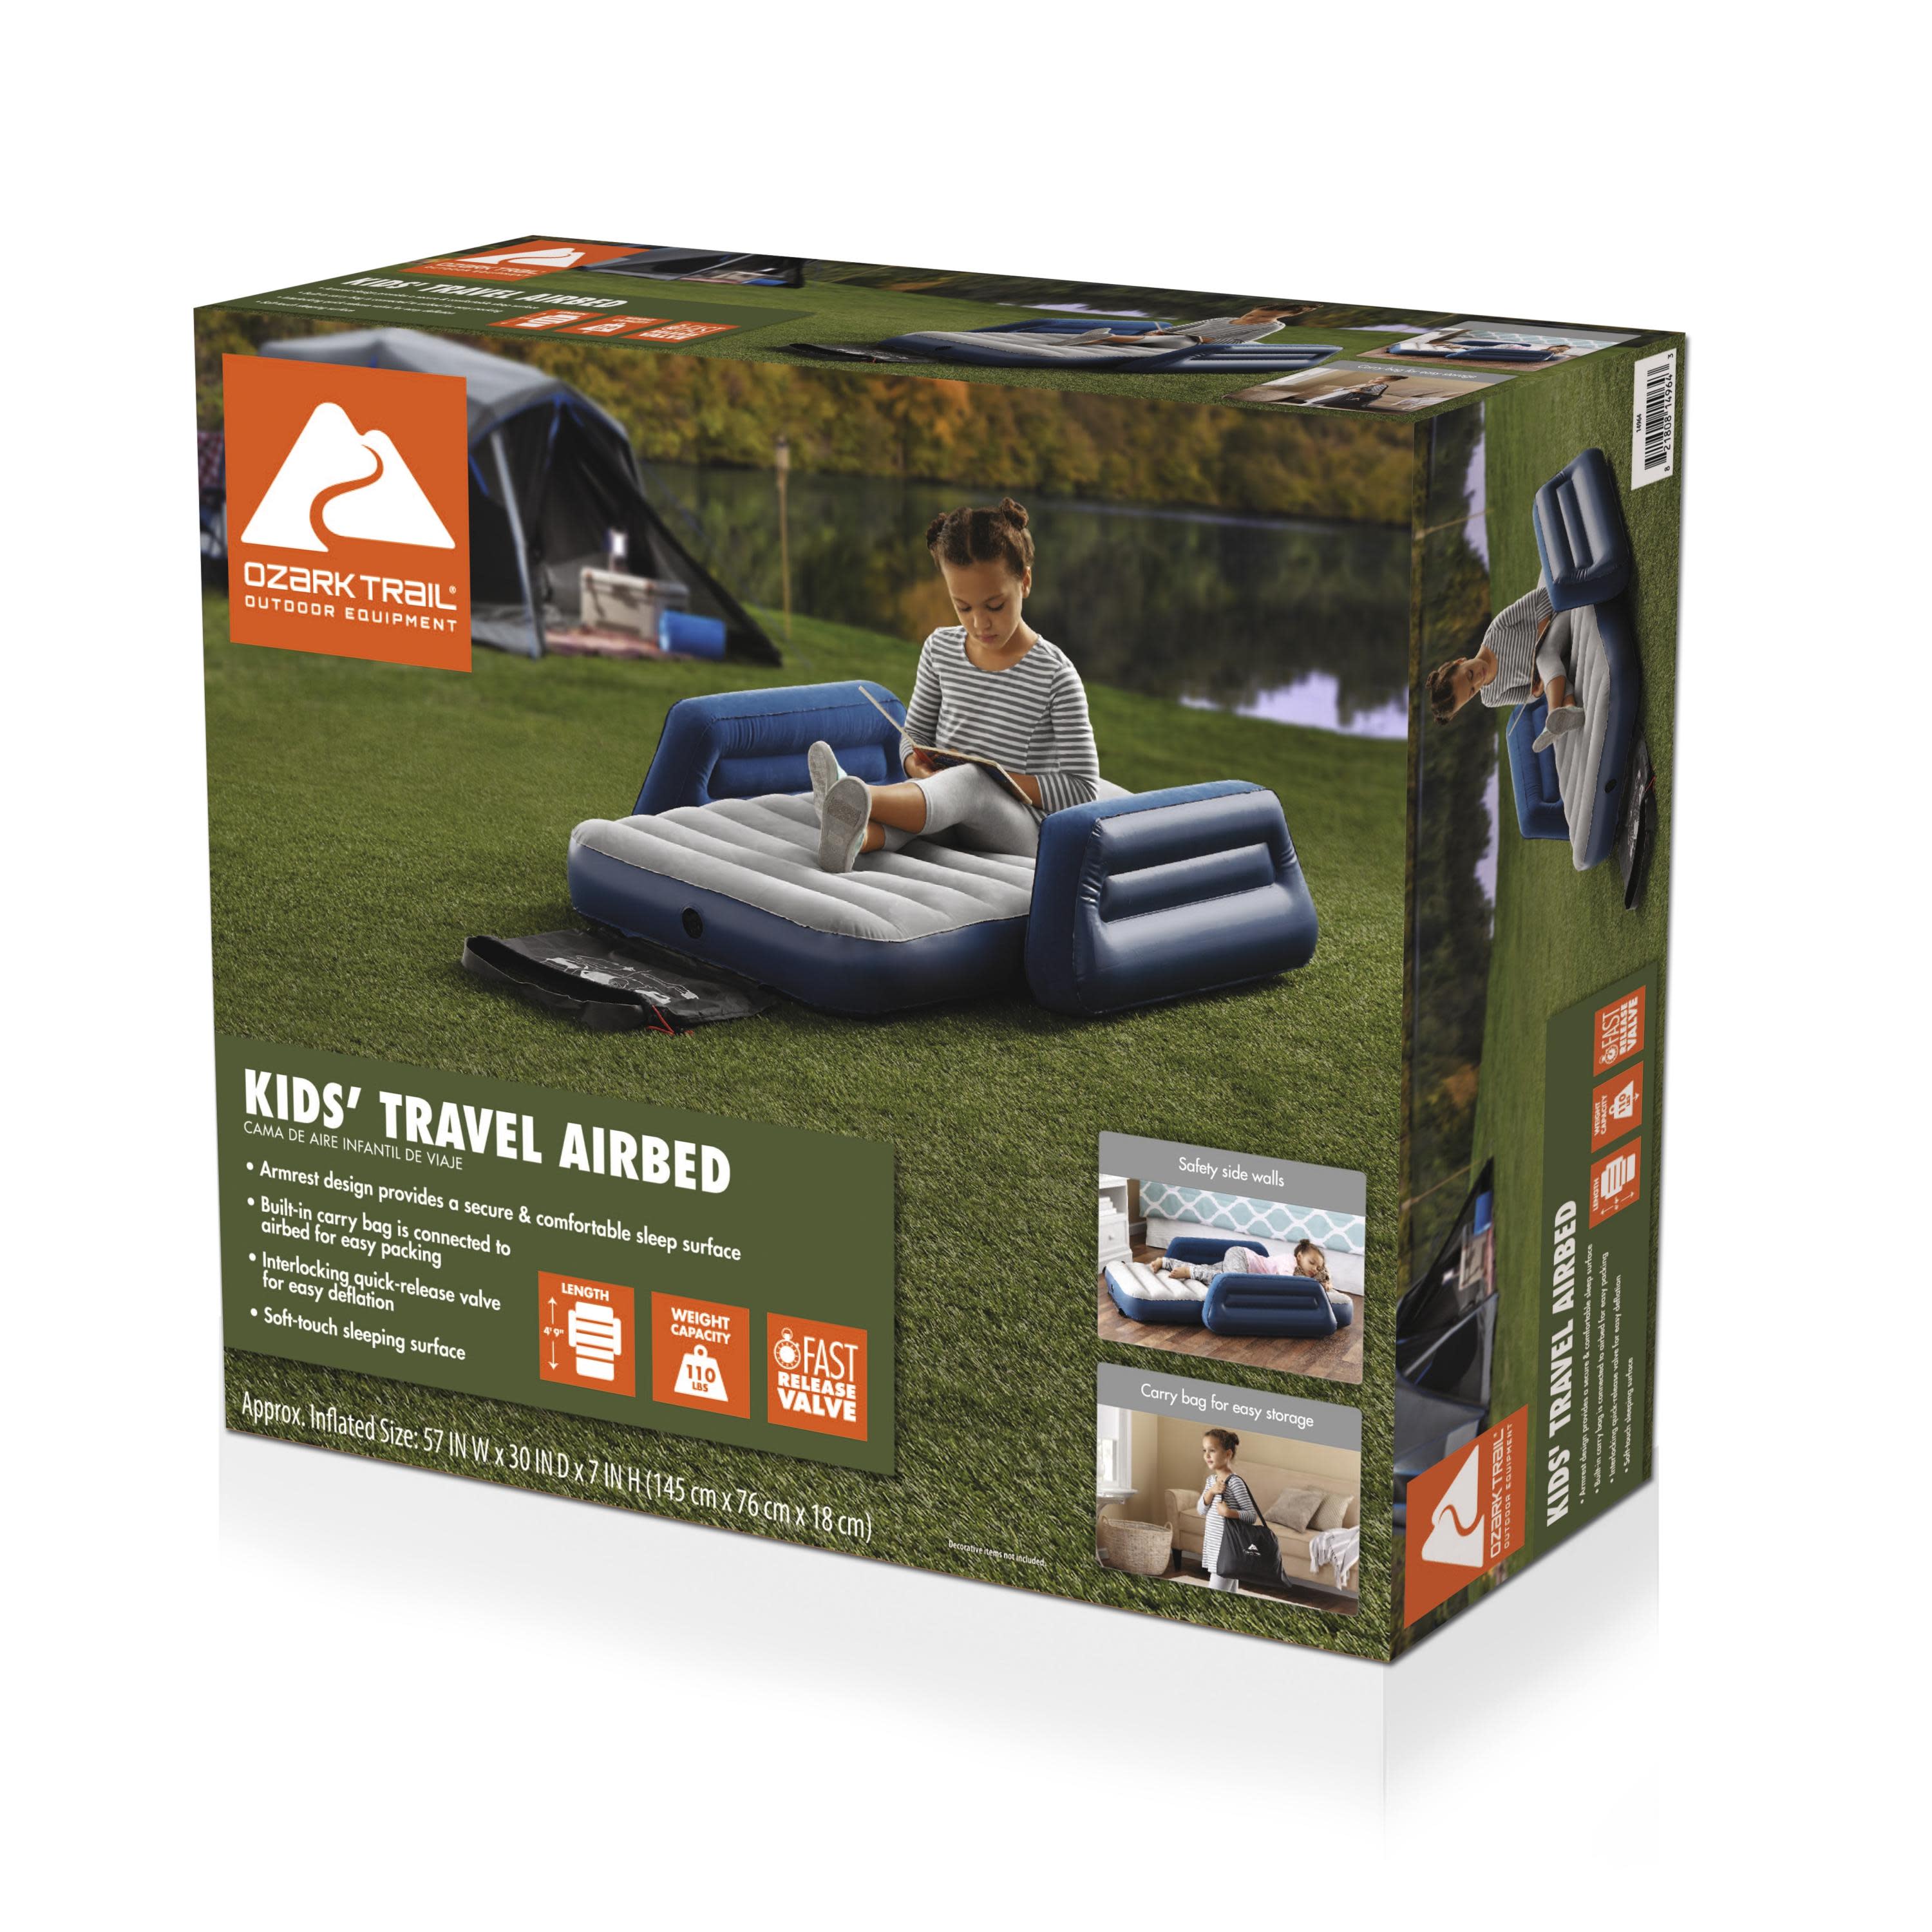 Ozark Trail Kids Camping Airbed with Travel Bag - image 3 of 6